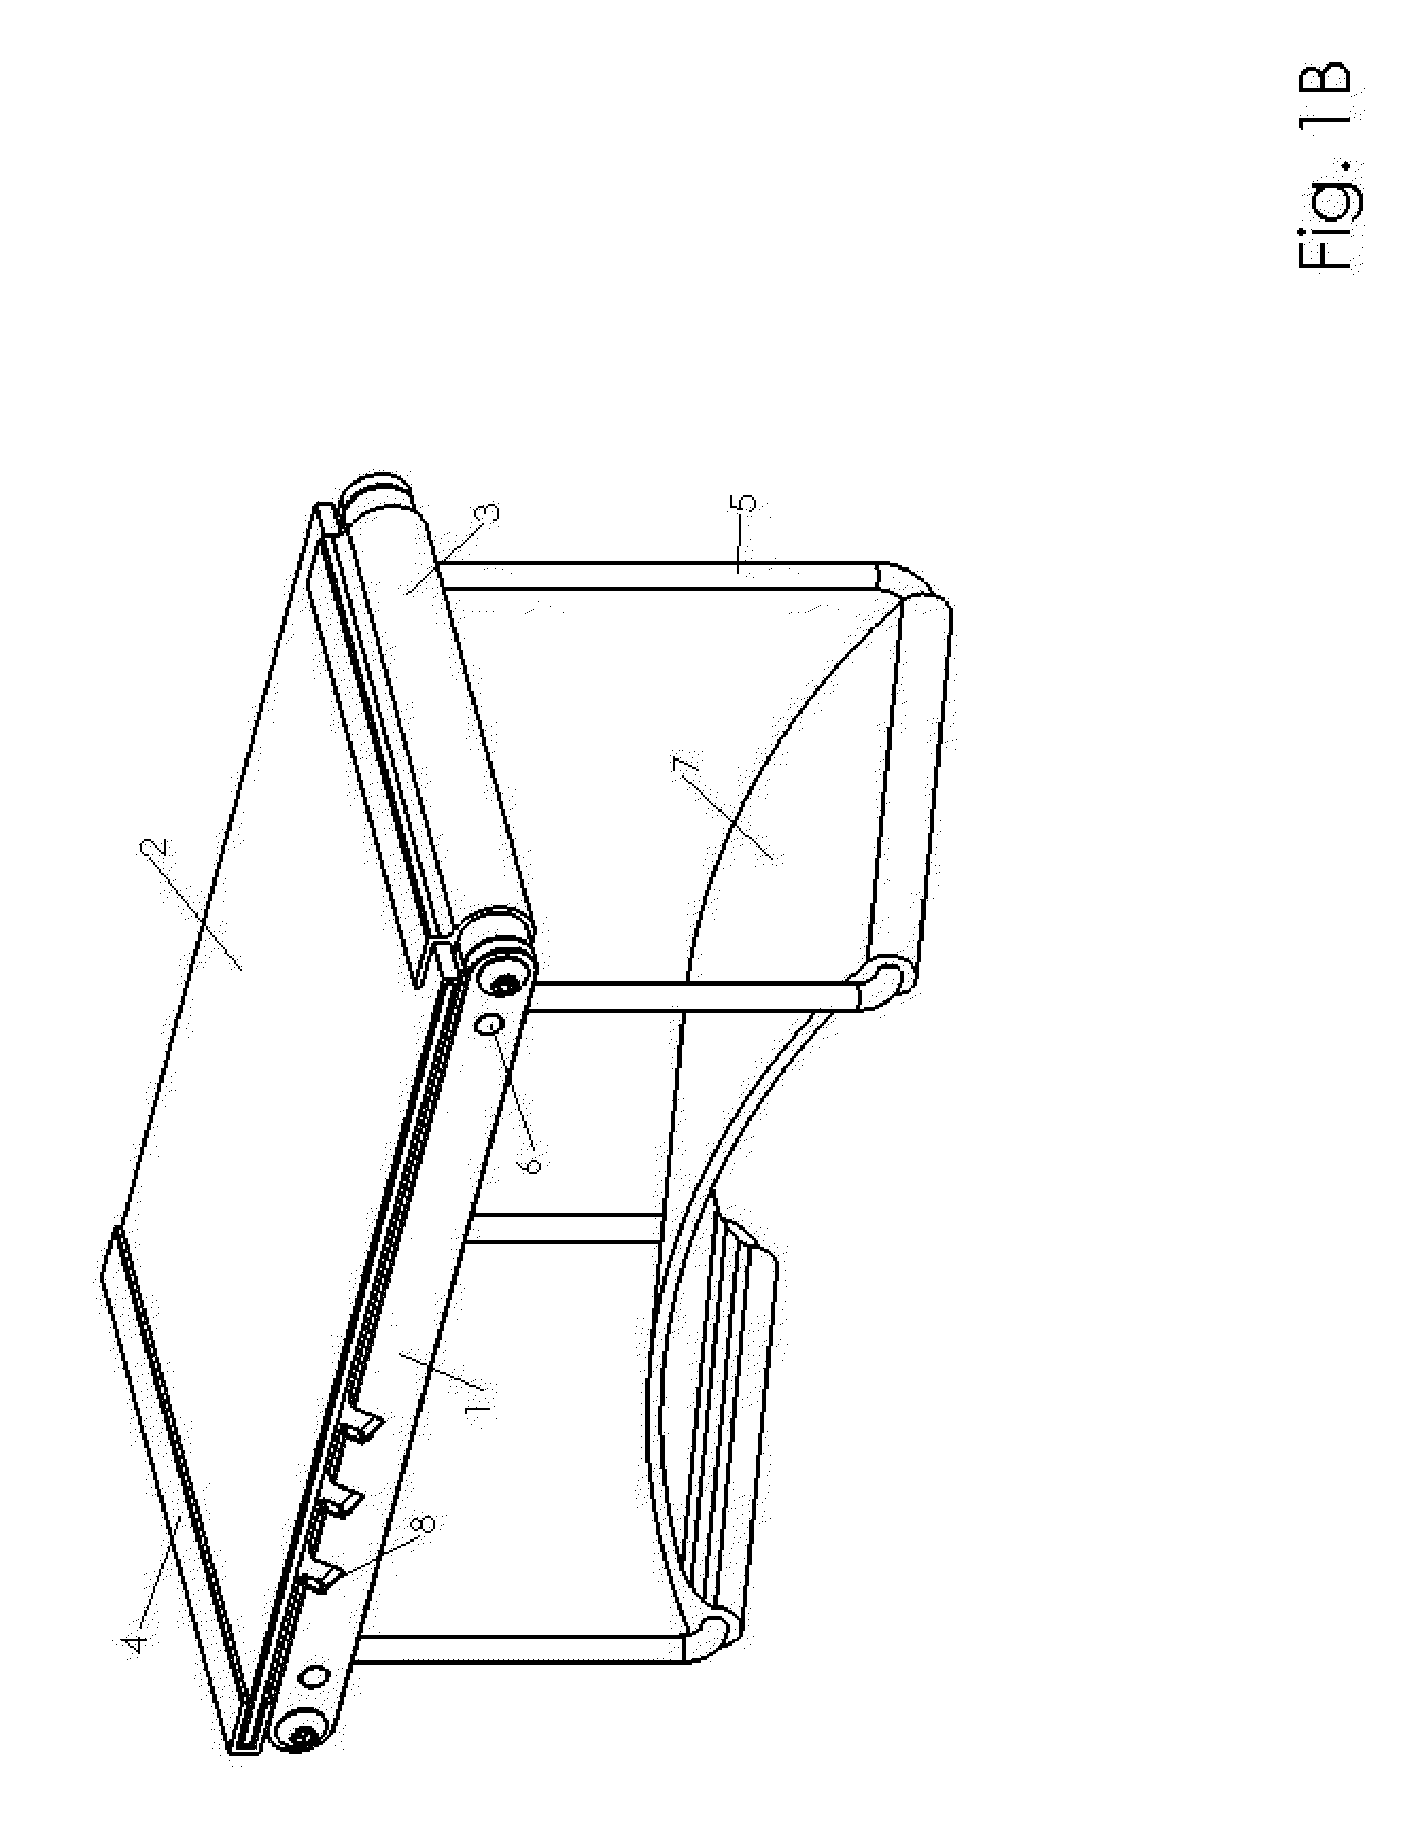 Foldable and height adjustable support for musical instrument used in seated position